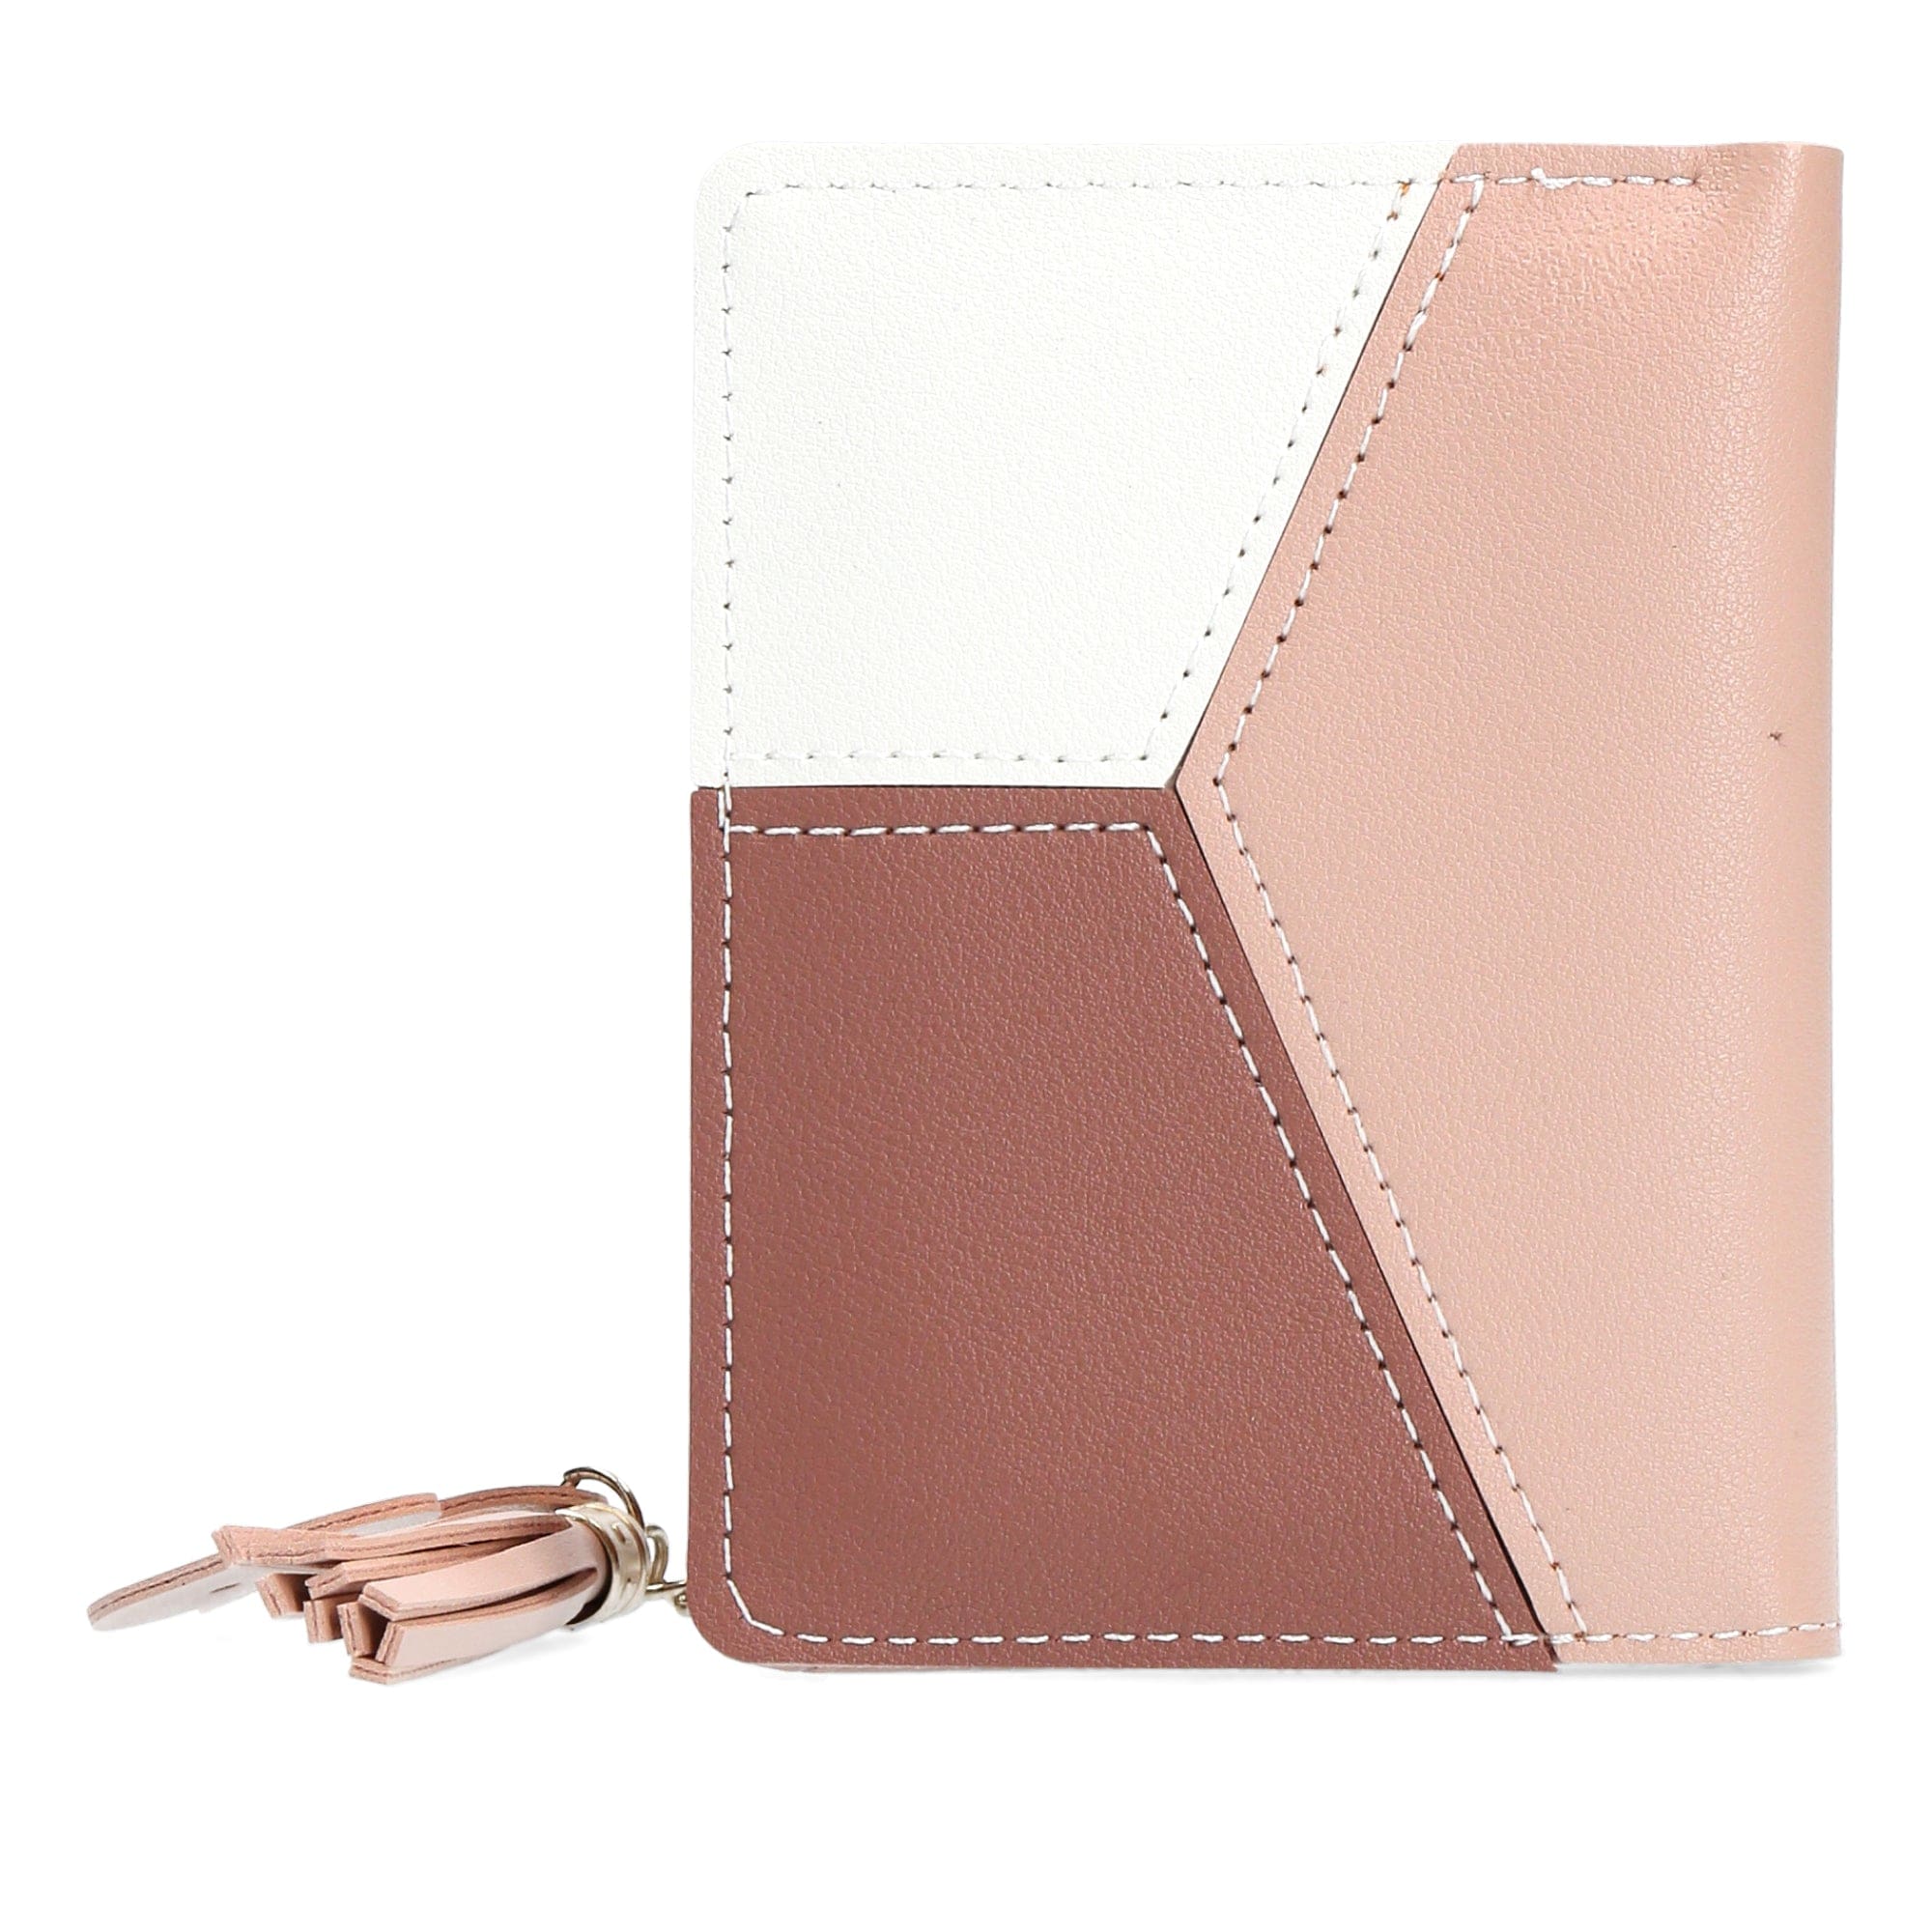 Montmartre cardholder - Pink - Small leather goods